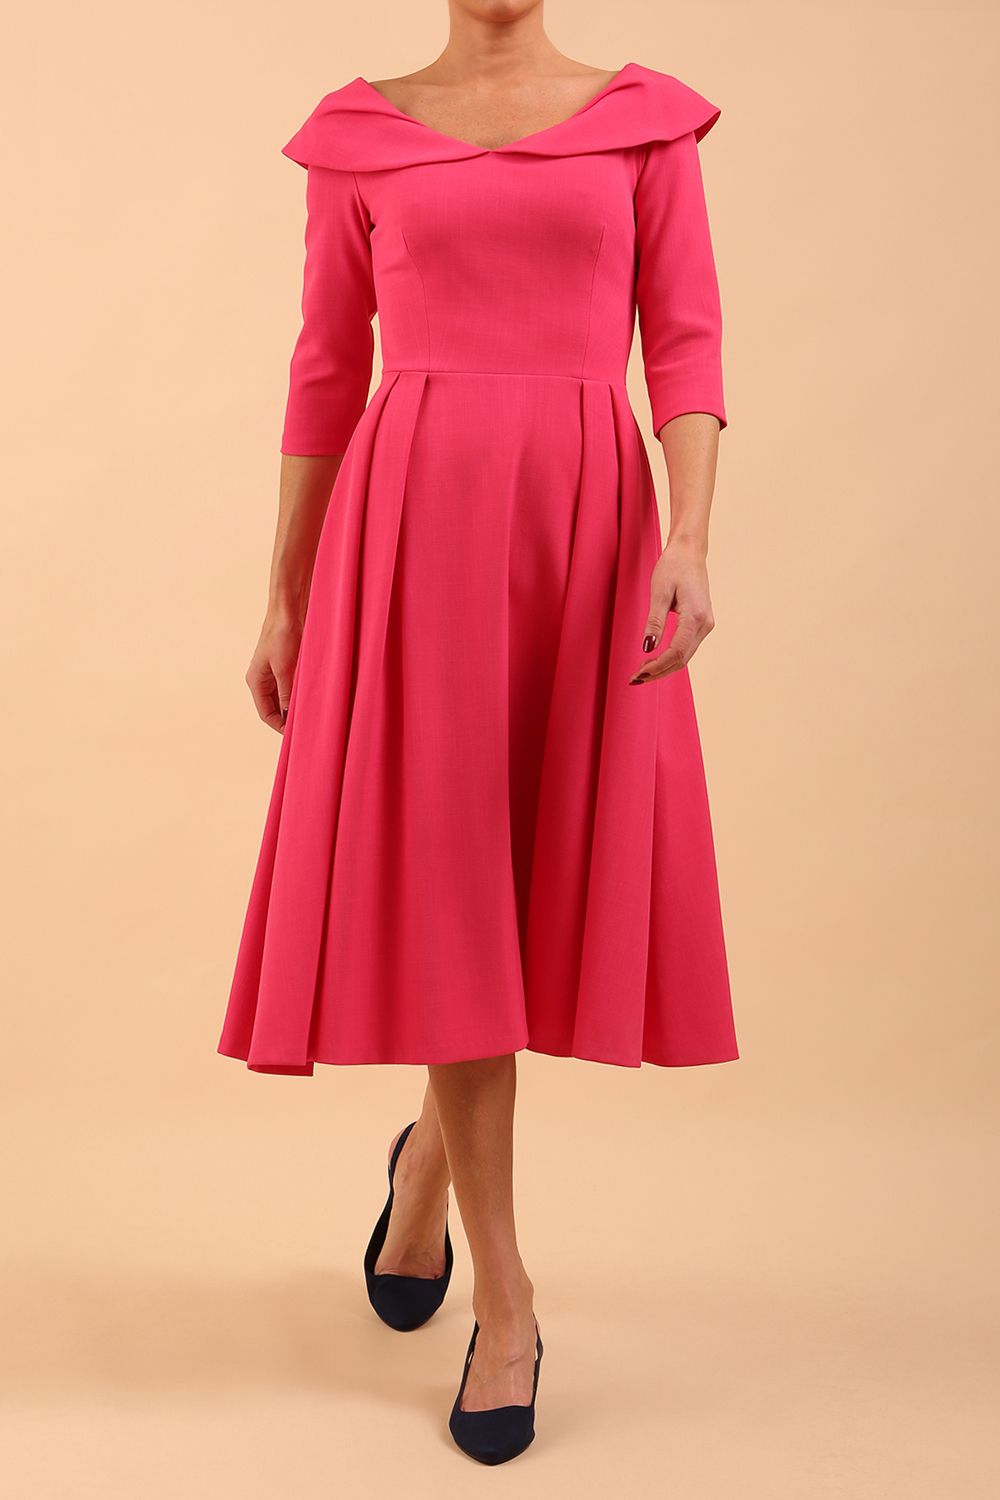 Model wearing Diva Catwalk Chesterton Sleeved dress with oversized collar detail and a-line swing pleated skirt in colour fuchsia pink front